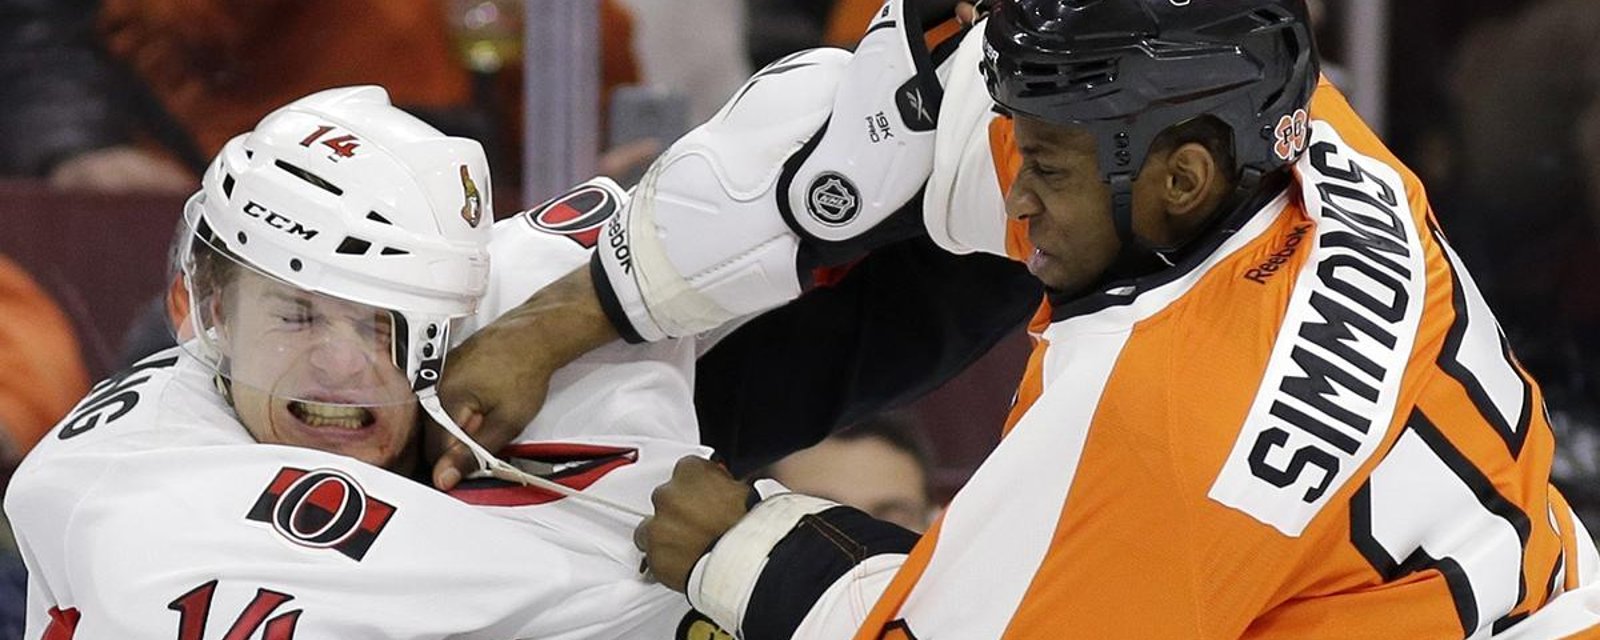 Injury Report: Flyers give update on Simmonds